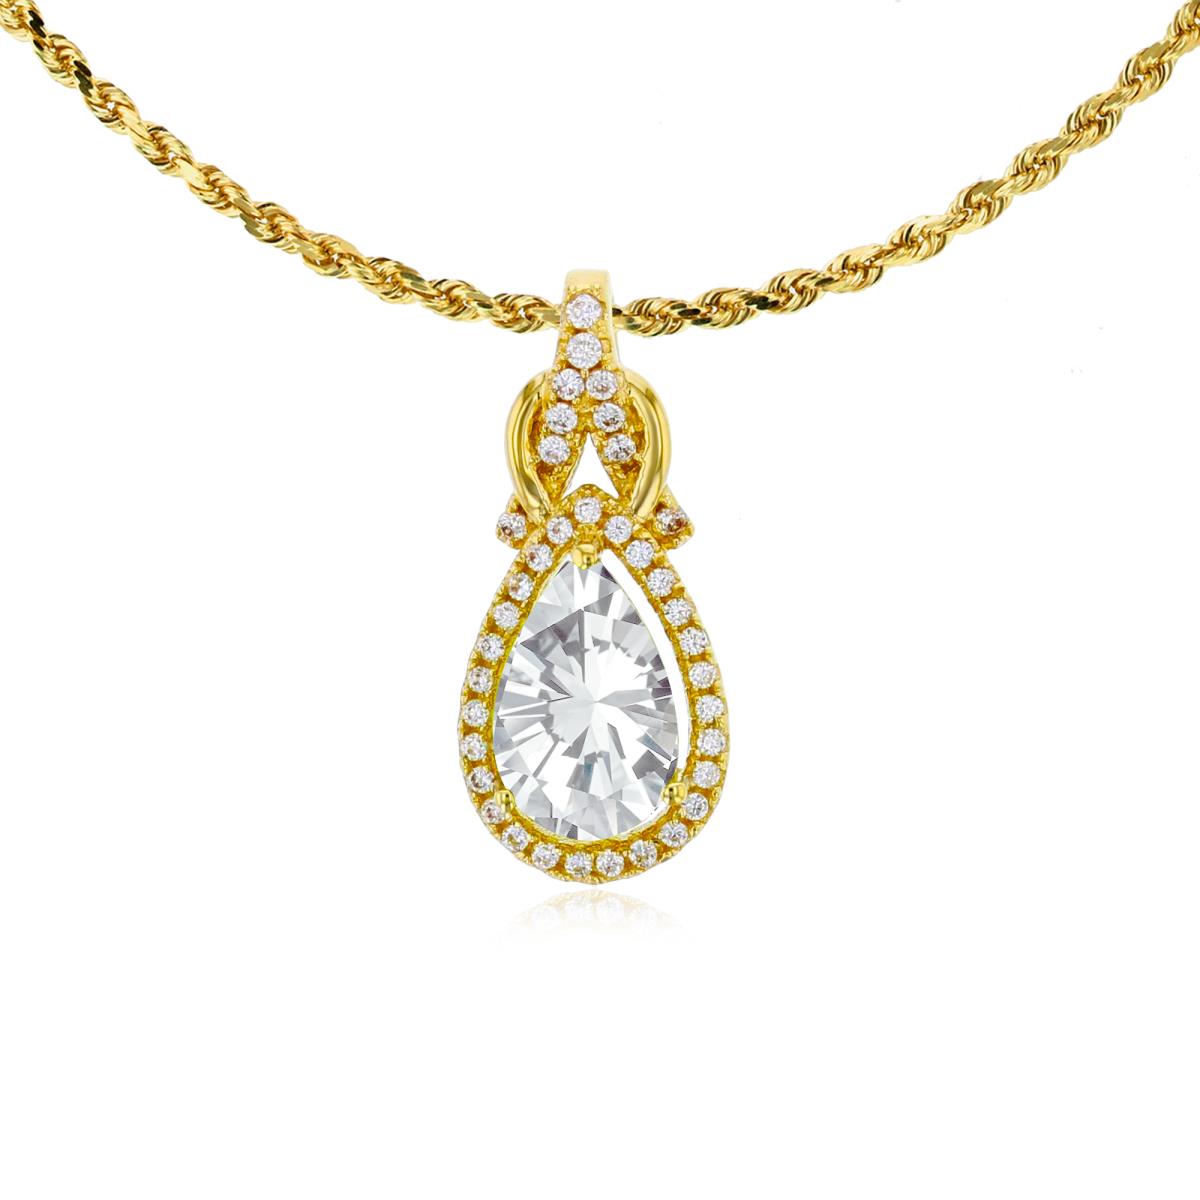 14K Yellow Gold 8x5mm Pear Cut White Topaz & 0.11 CTTW Rnd Diamond Knot 18" Rope Chain Necklace